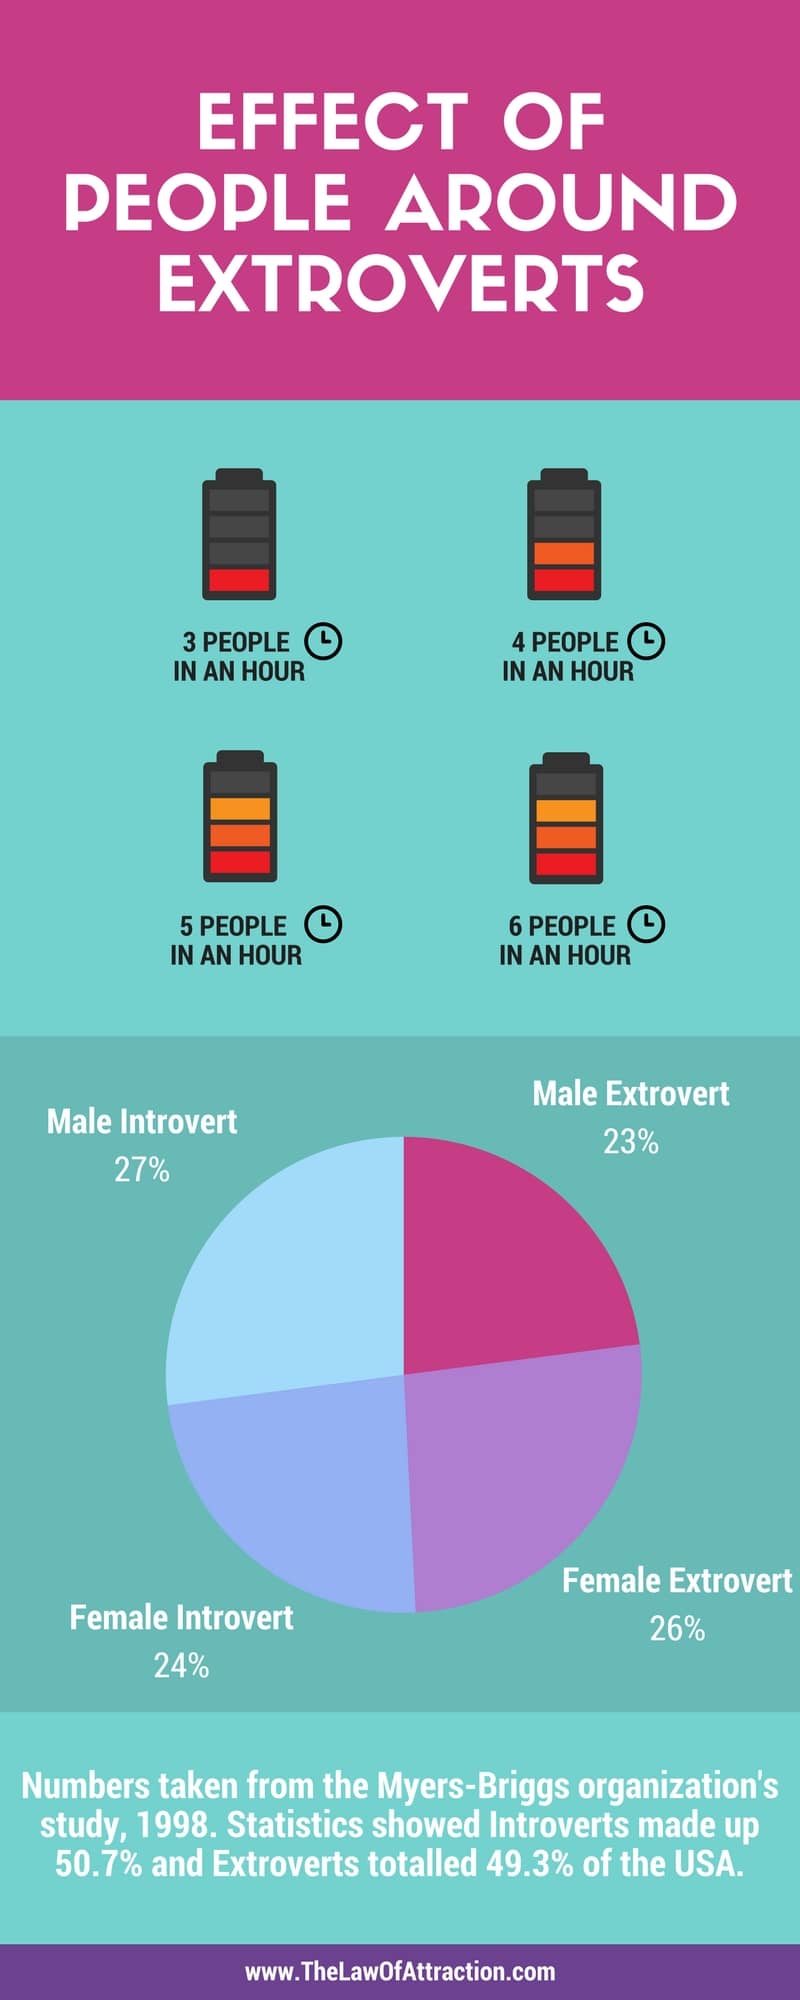 EFFECT OF PEOPLE AROUND EXTROVERTS